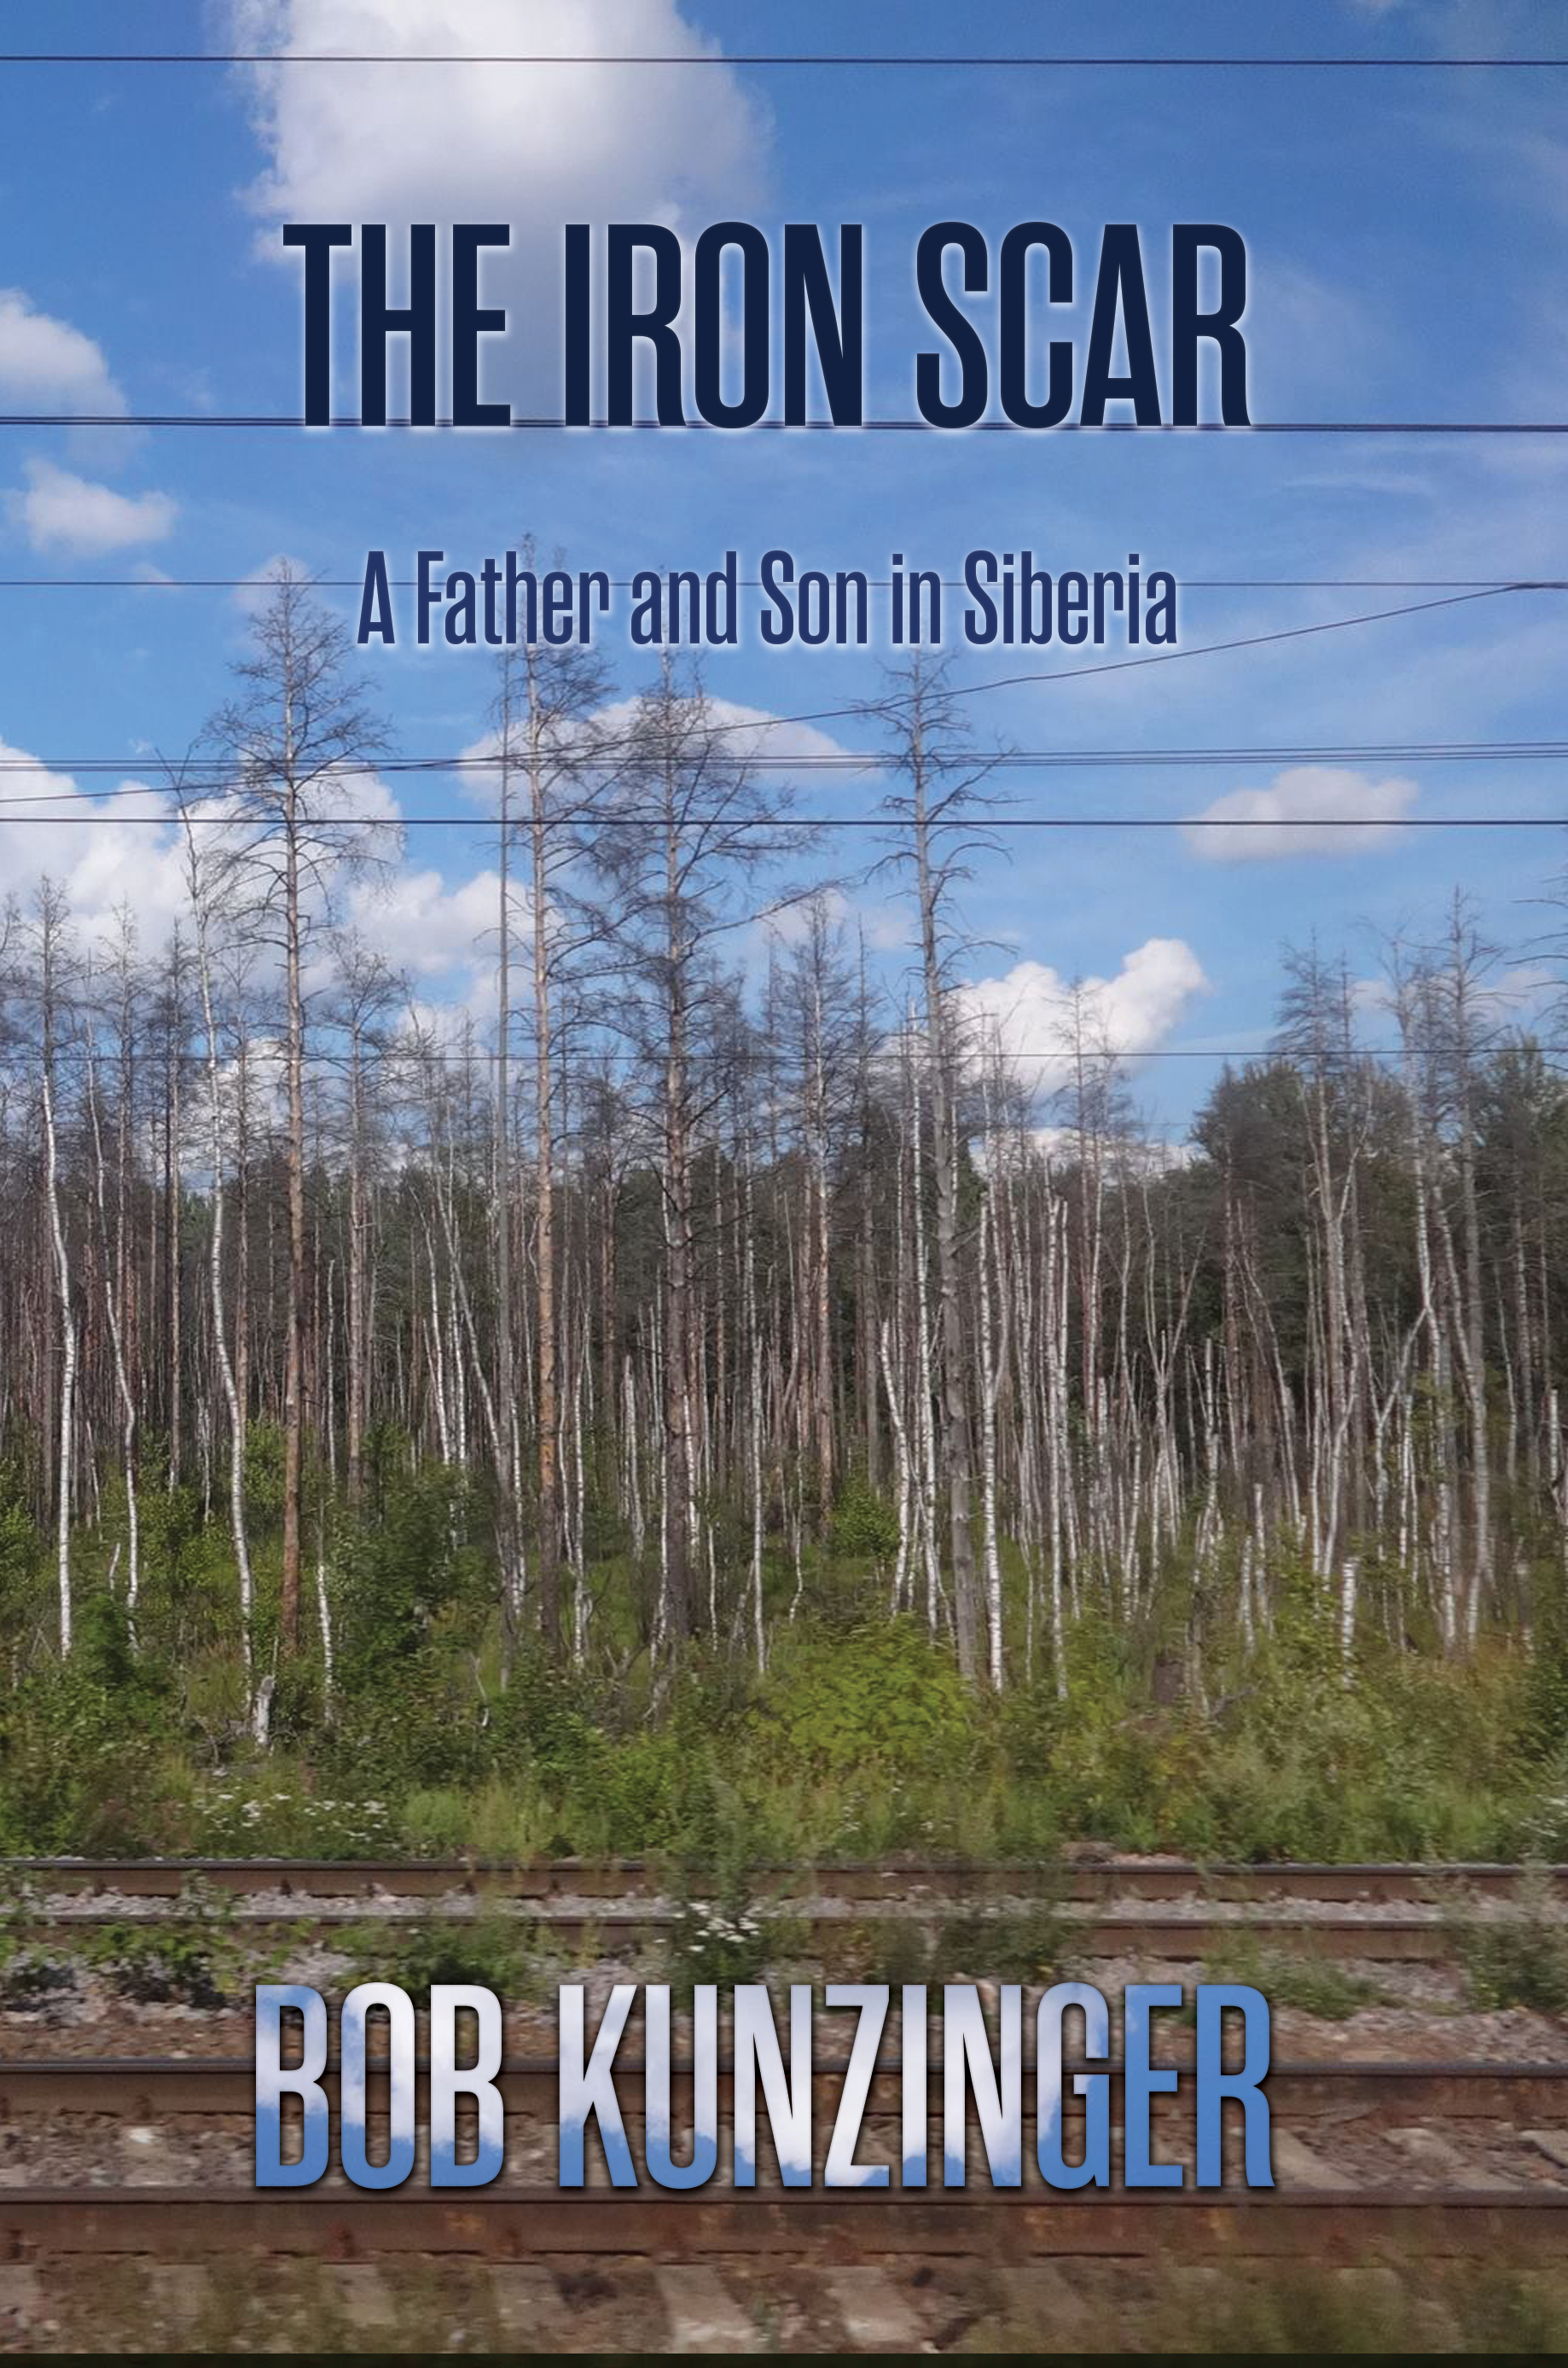 The Iron Scar: A Father and Son in Siberia by Bob Kunzinger with photos by Michael Kunzinger. Image shows a young forest along the tracks with a bright blue sky above